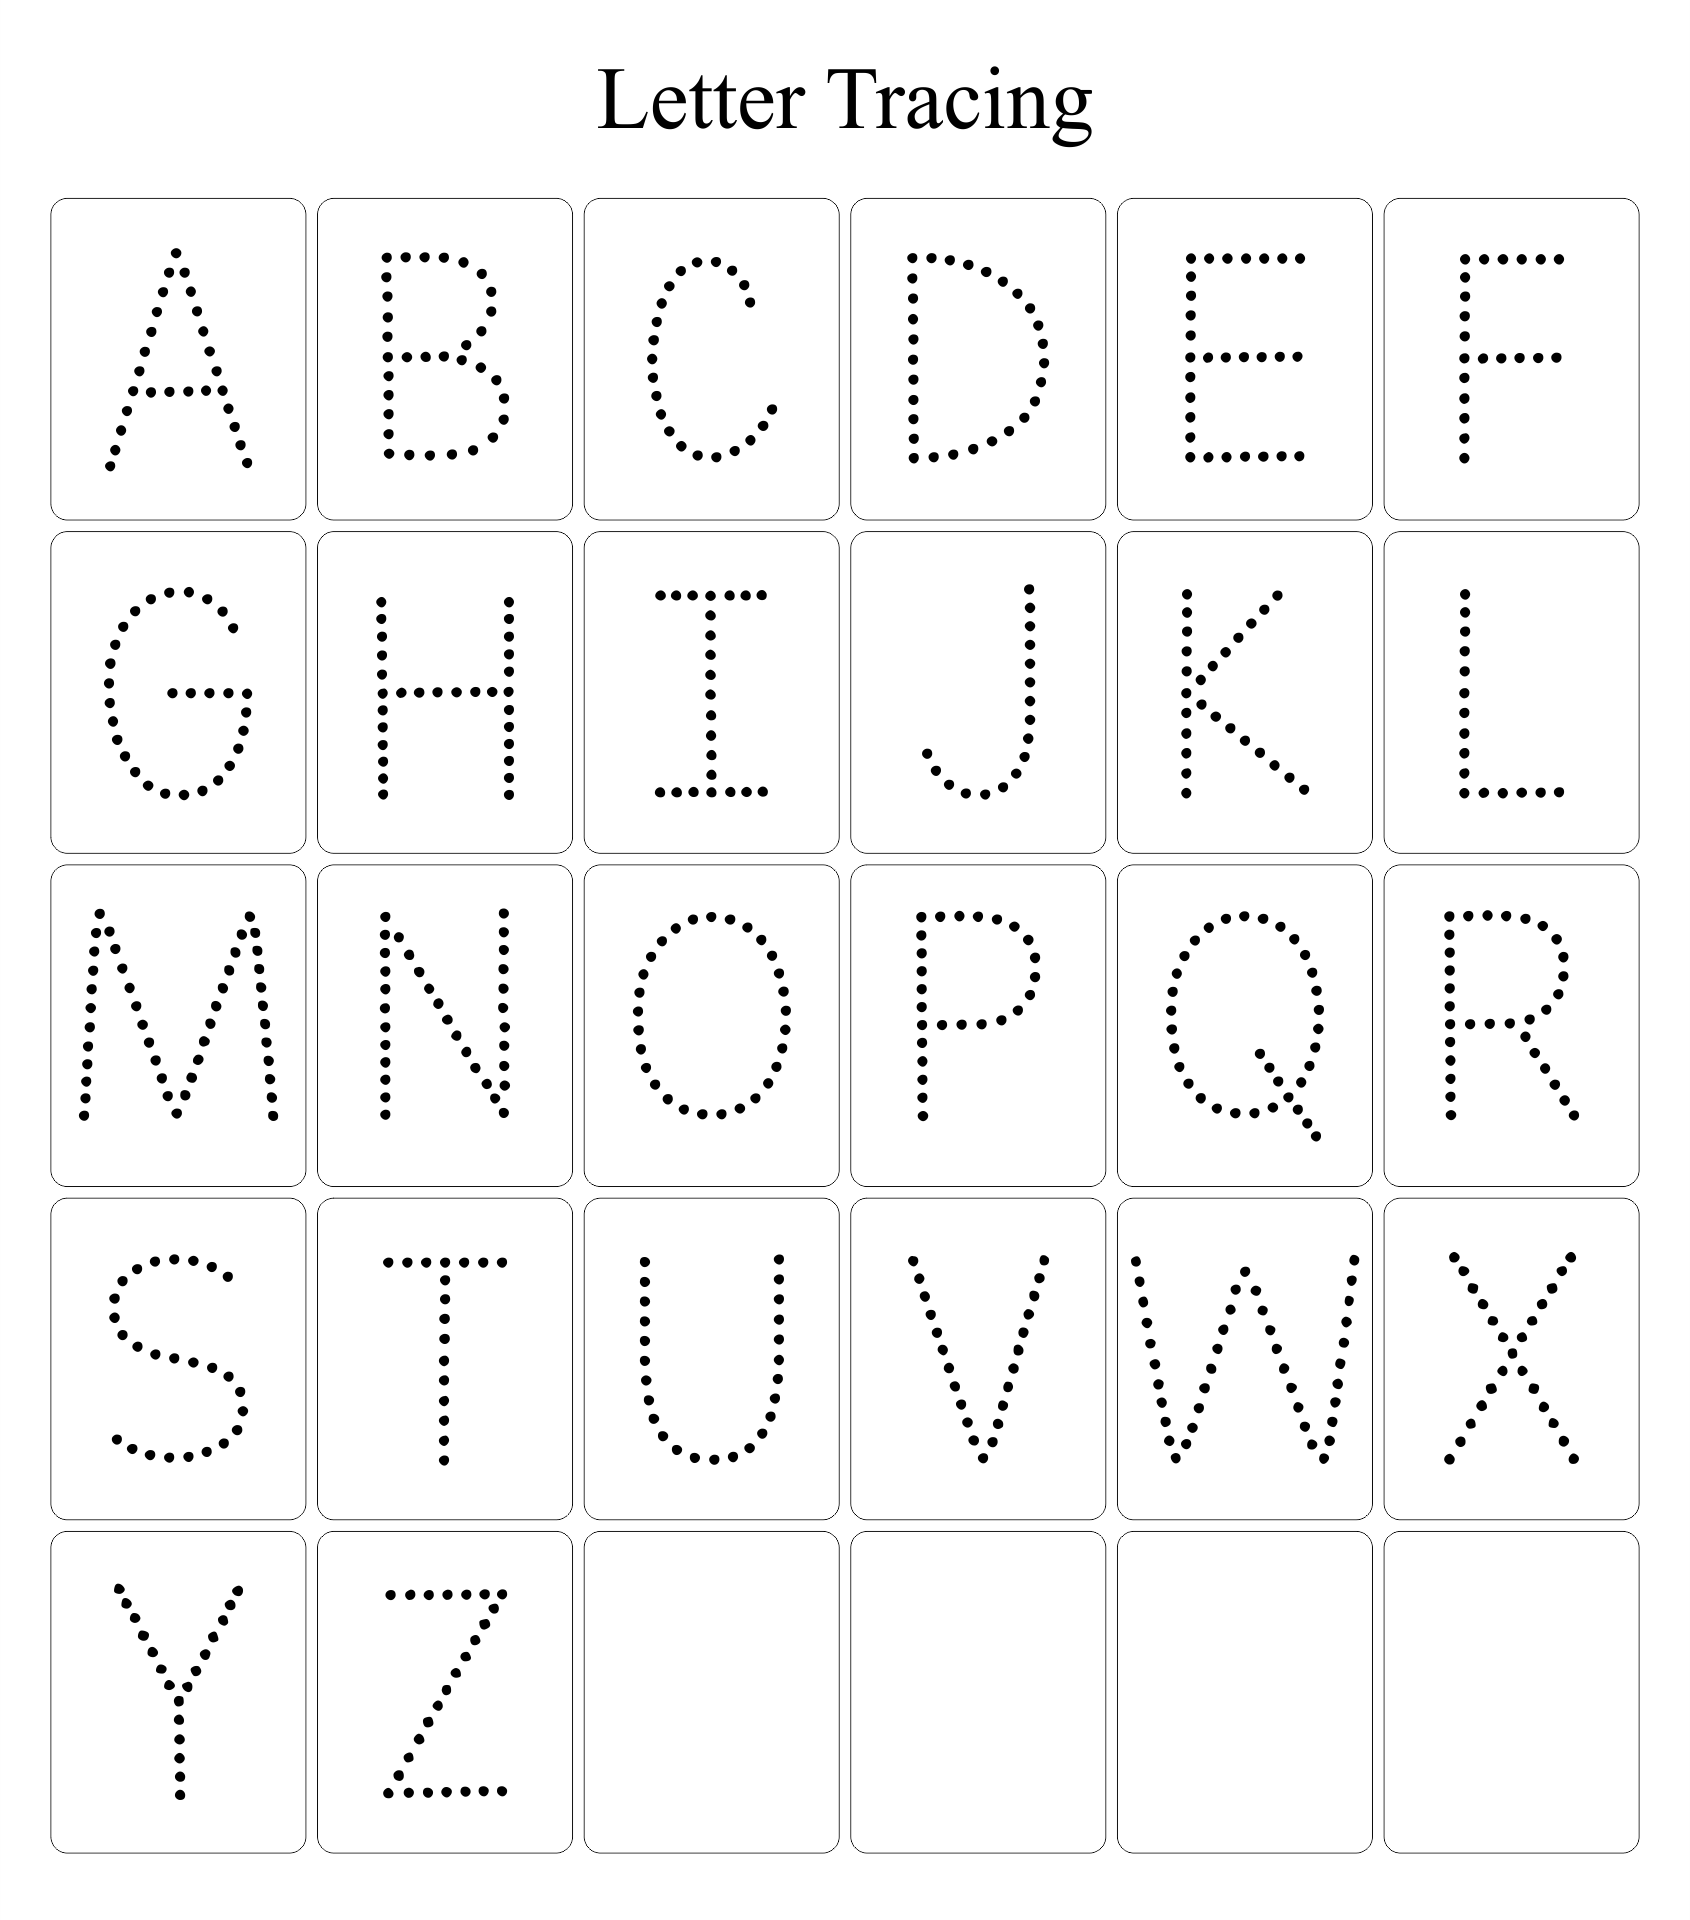 7-best-images-of-free-printable-tracing-letters-preschool-worksheets-alphabet-tracing-letter-a